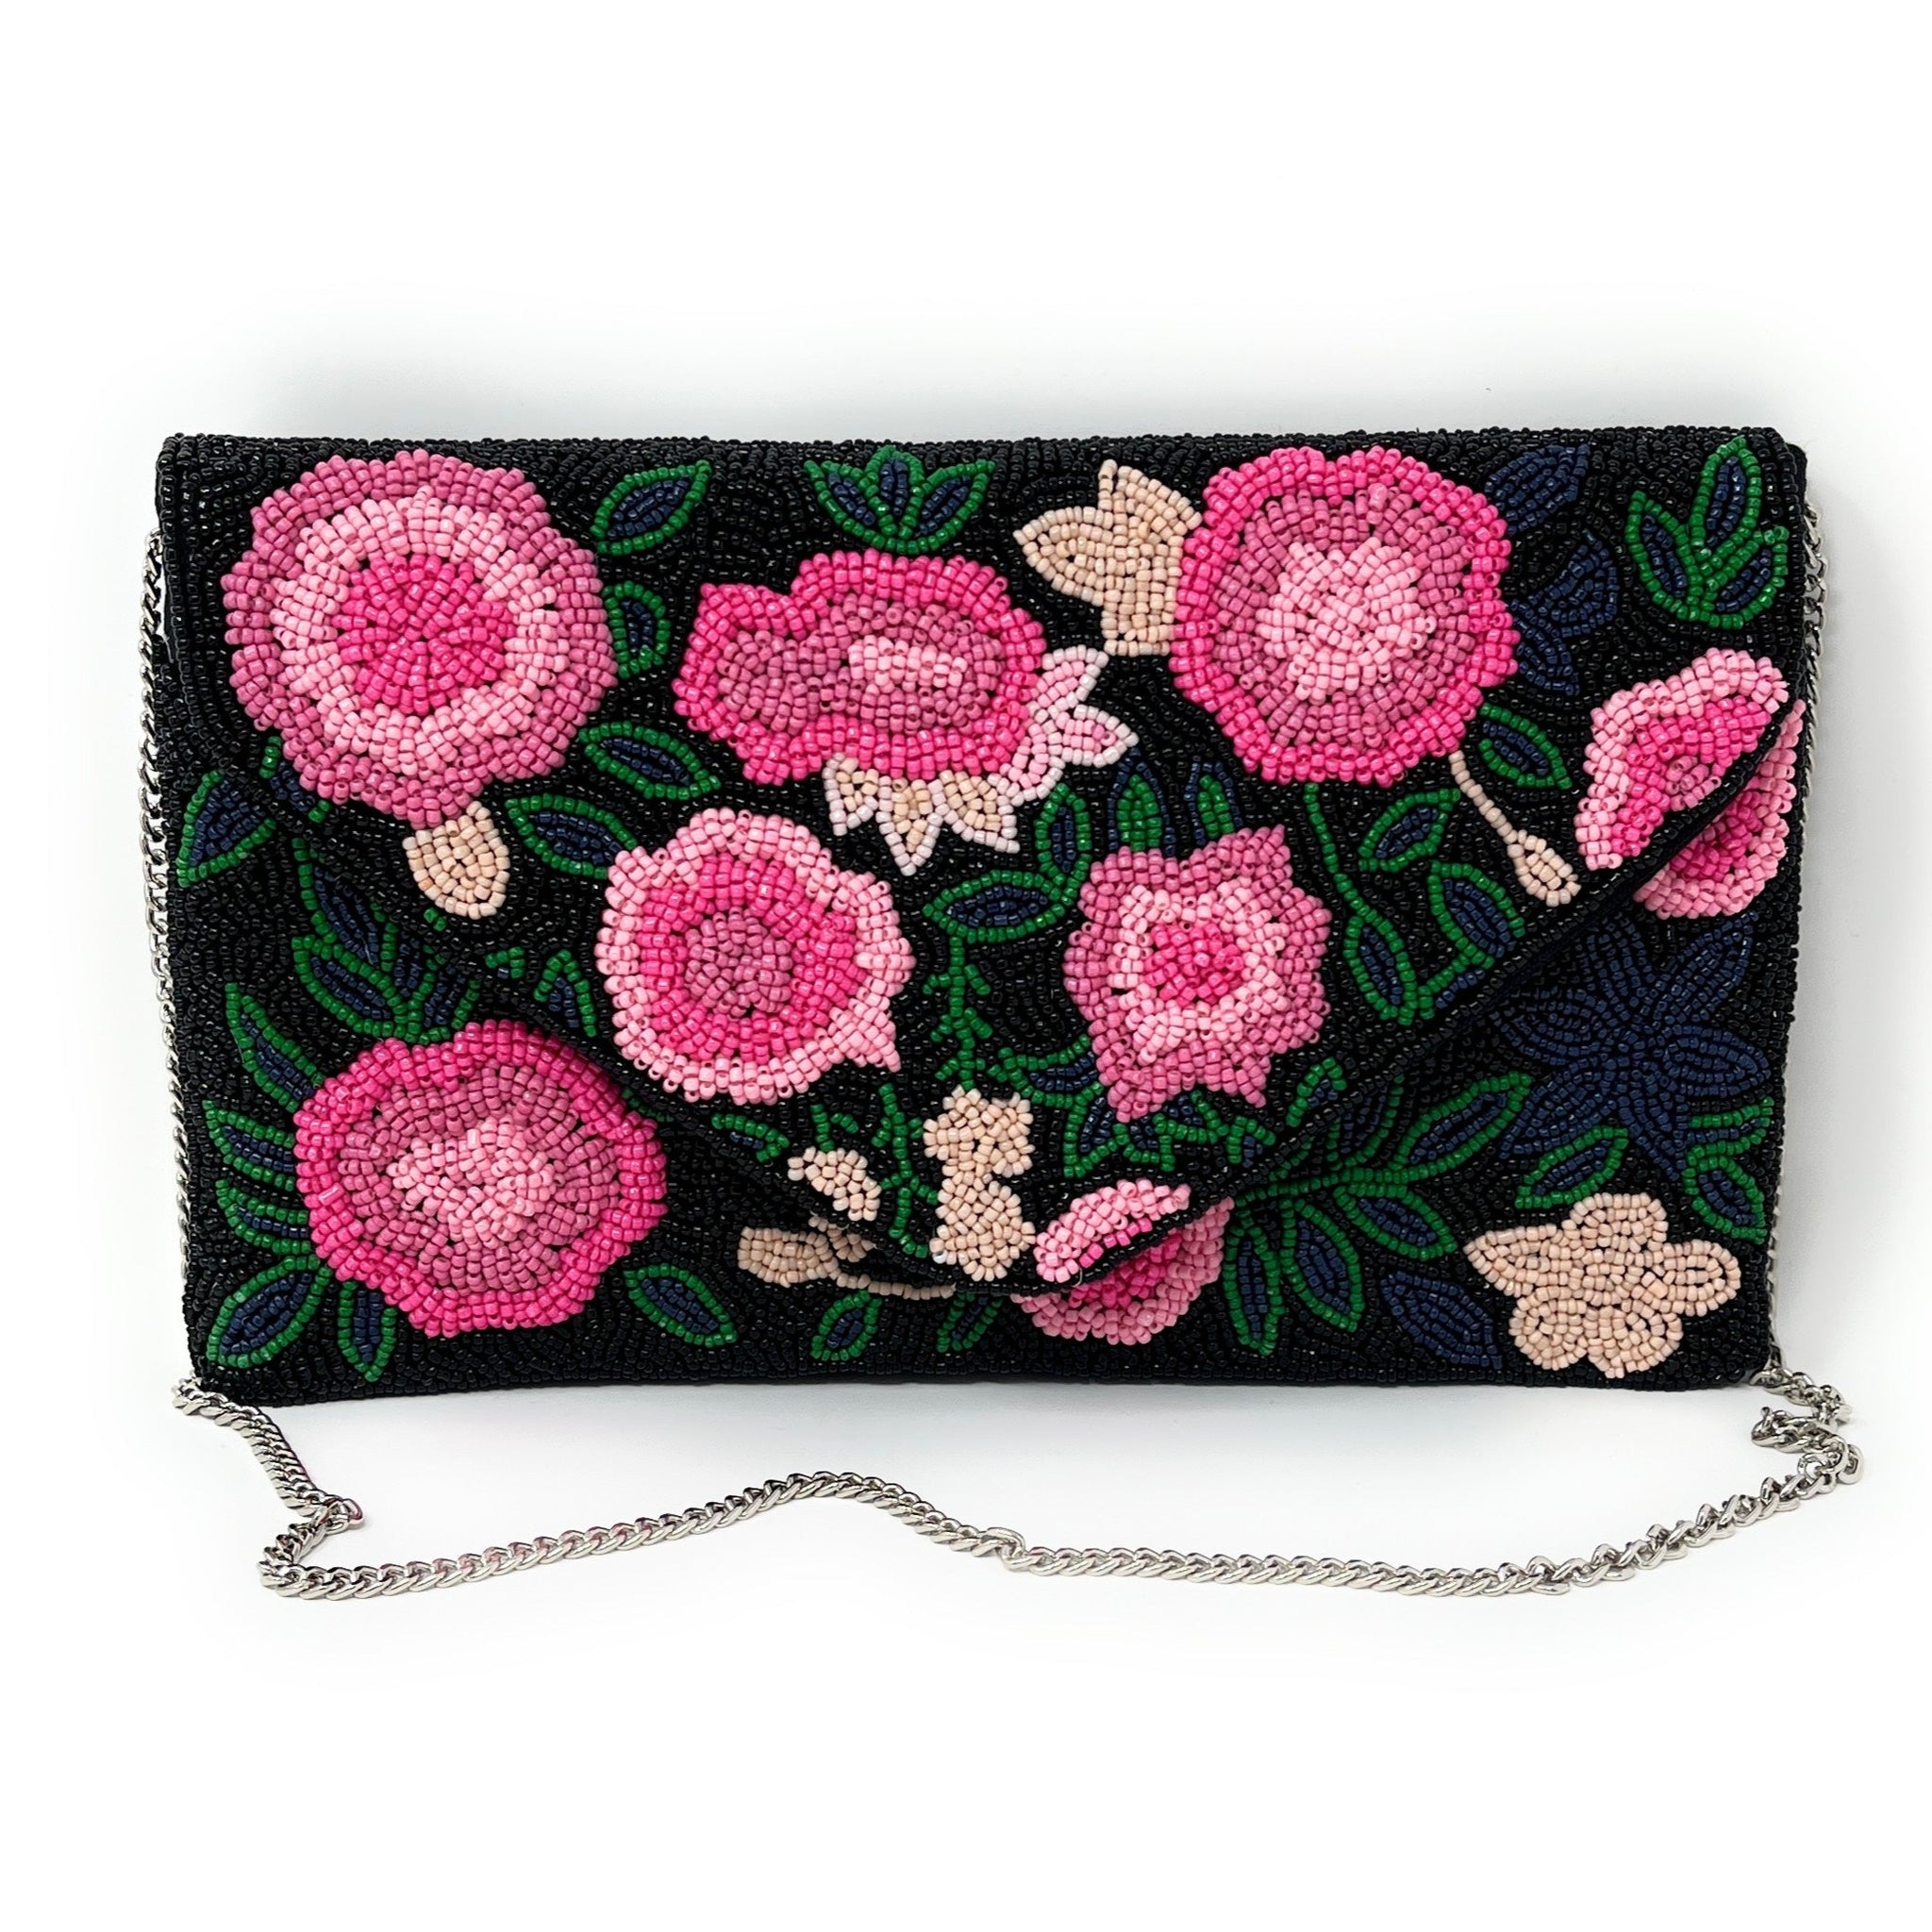 Hand Beaded Pink Clutch, Roses Seed Bead Clutch Bag, Floral Beaded Clutch